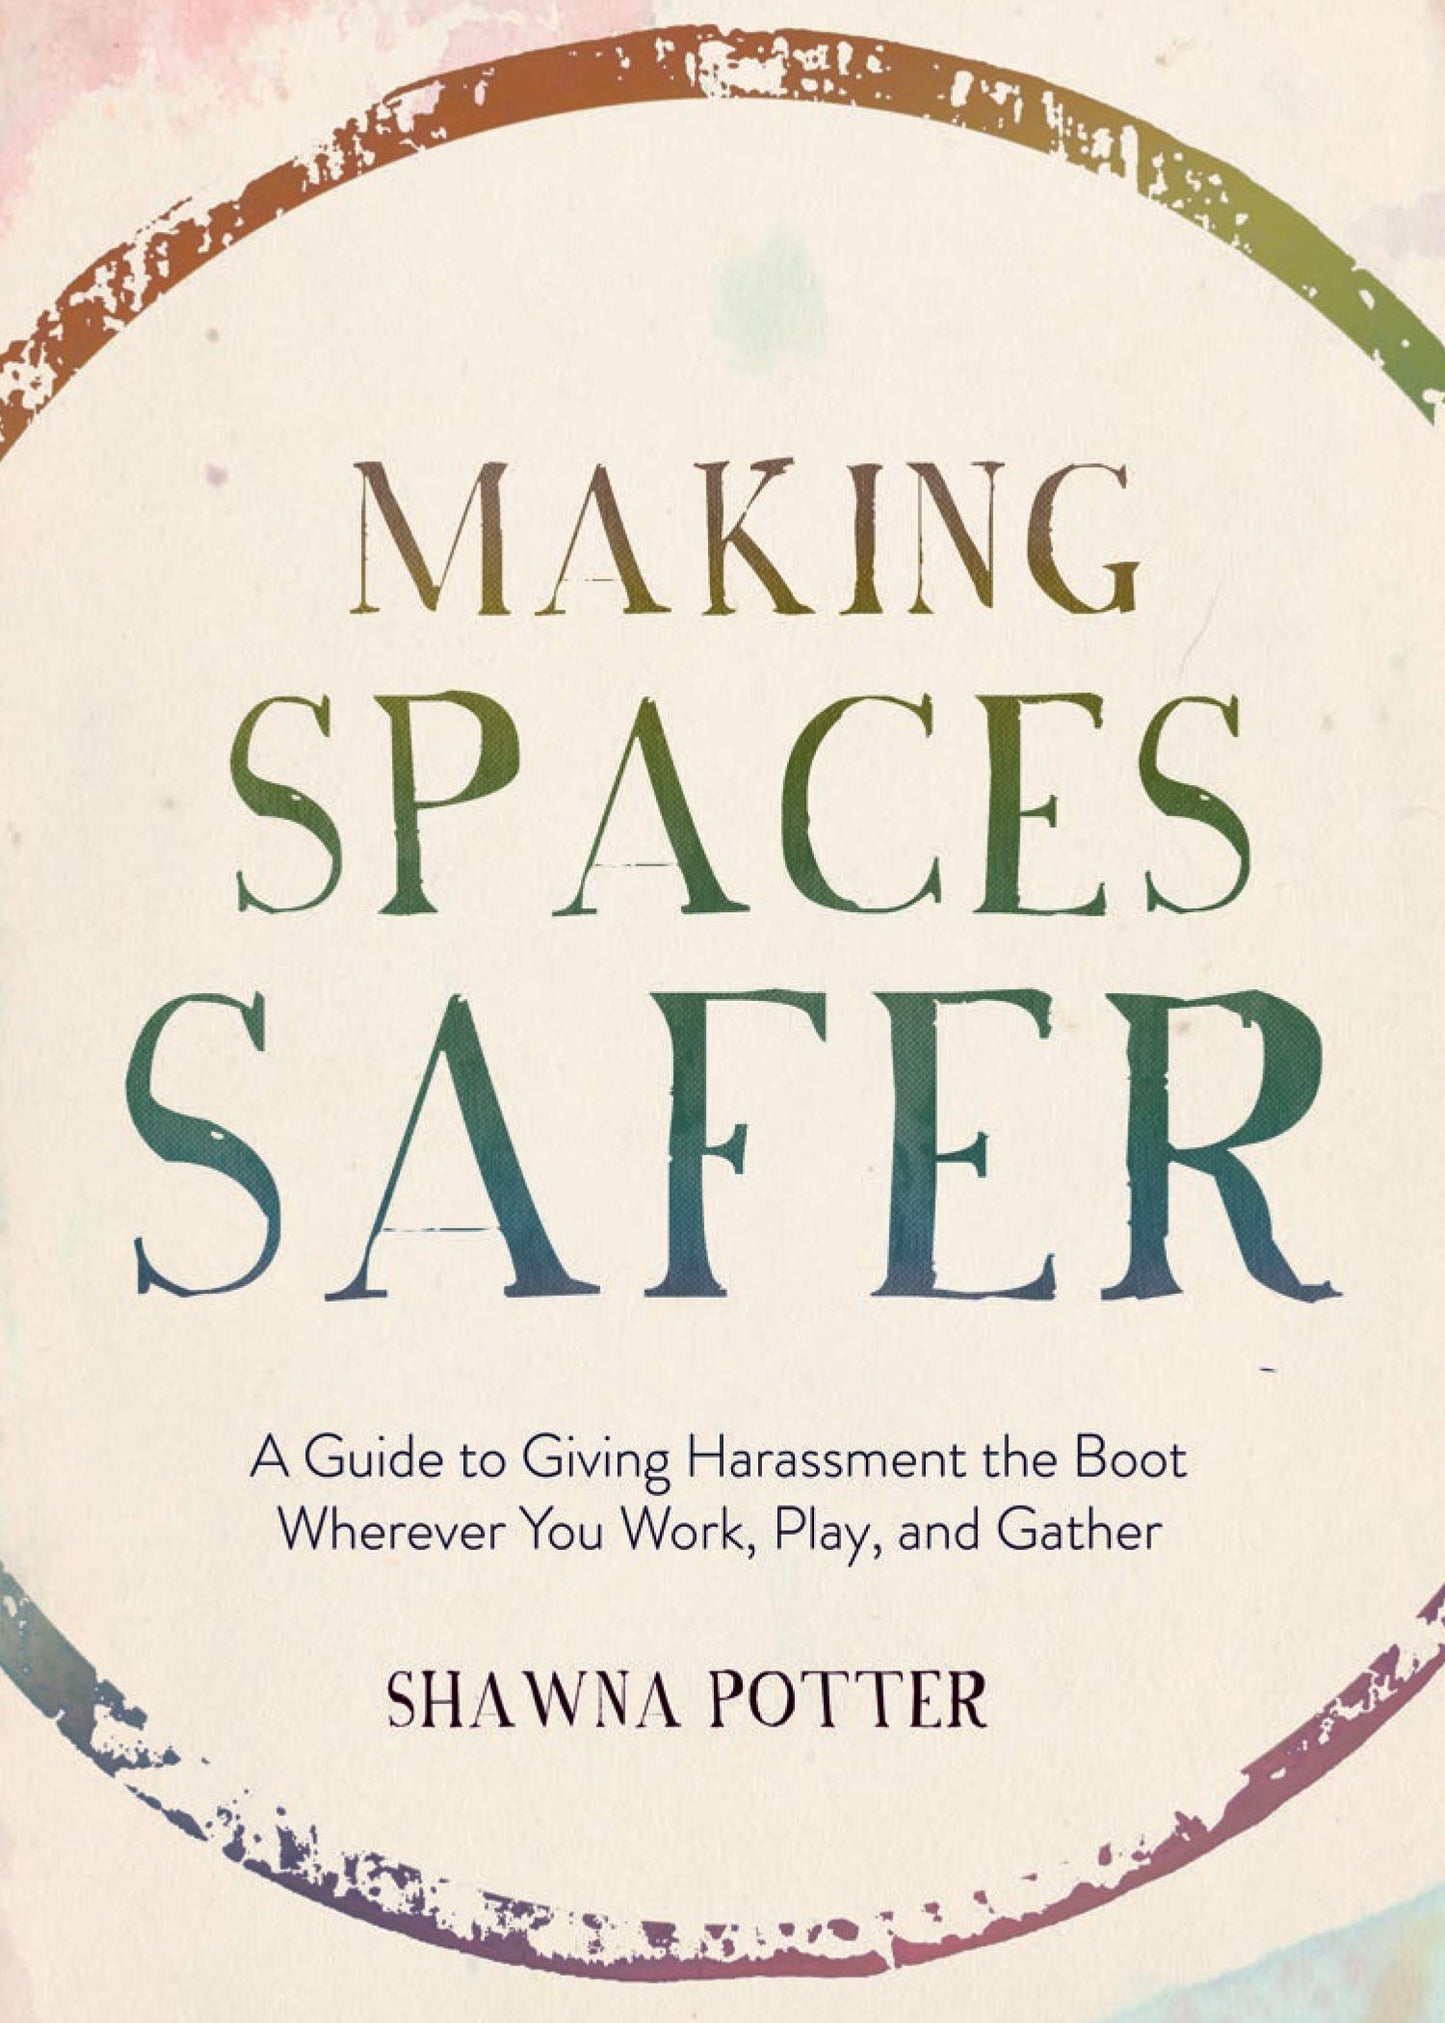 Making Spaces Safer, by Shawna Potter